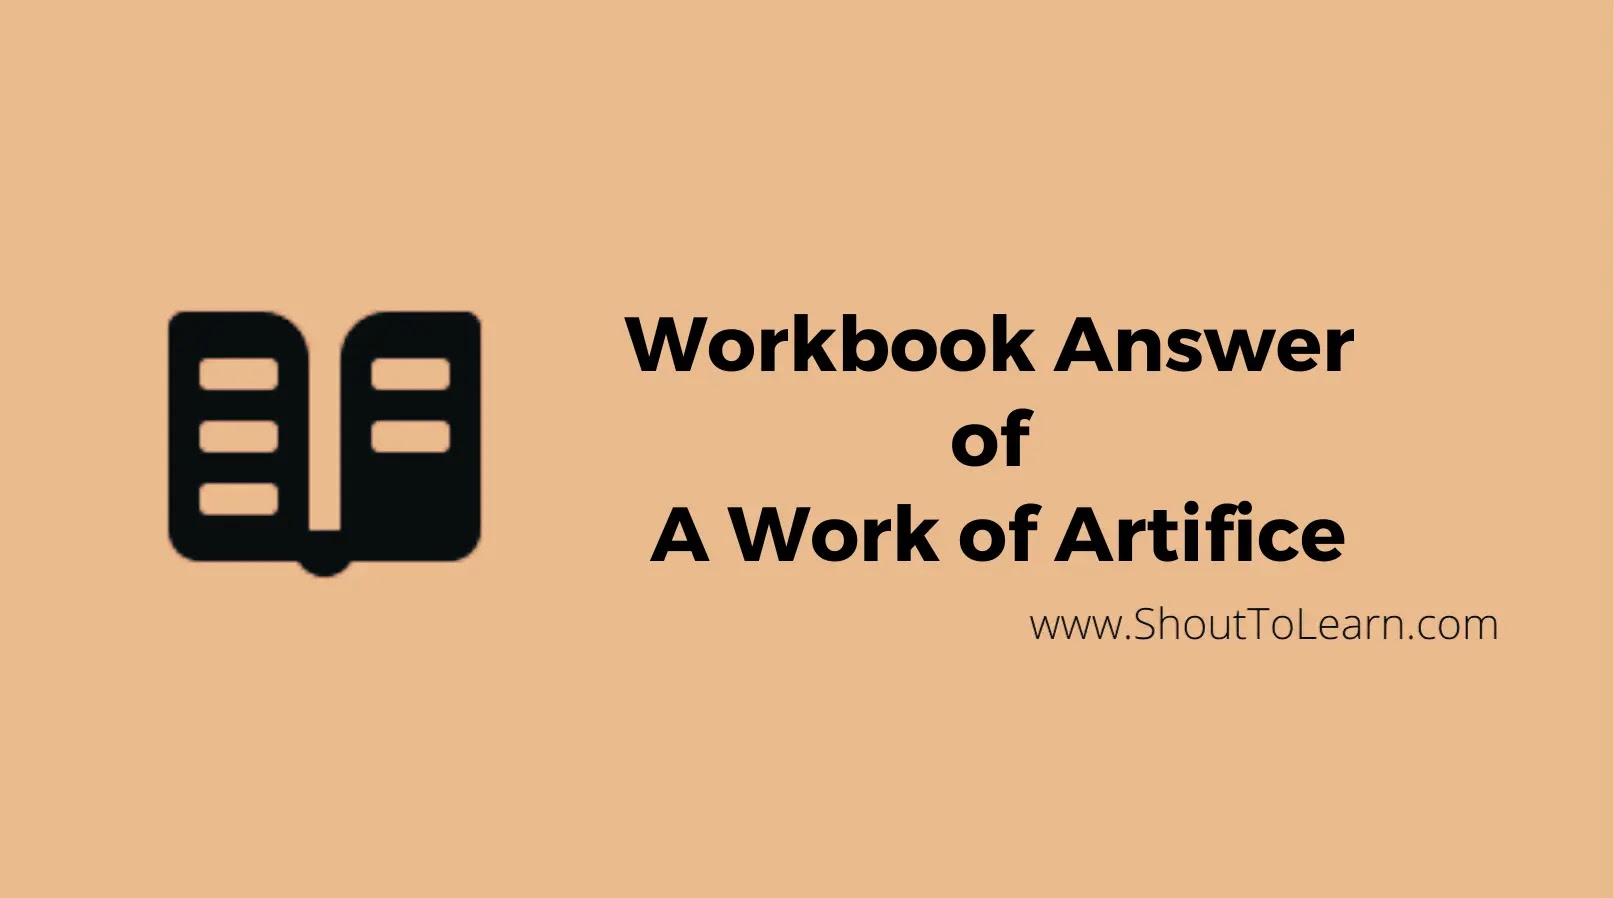 Workbook Answers Of A Work of Artifice